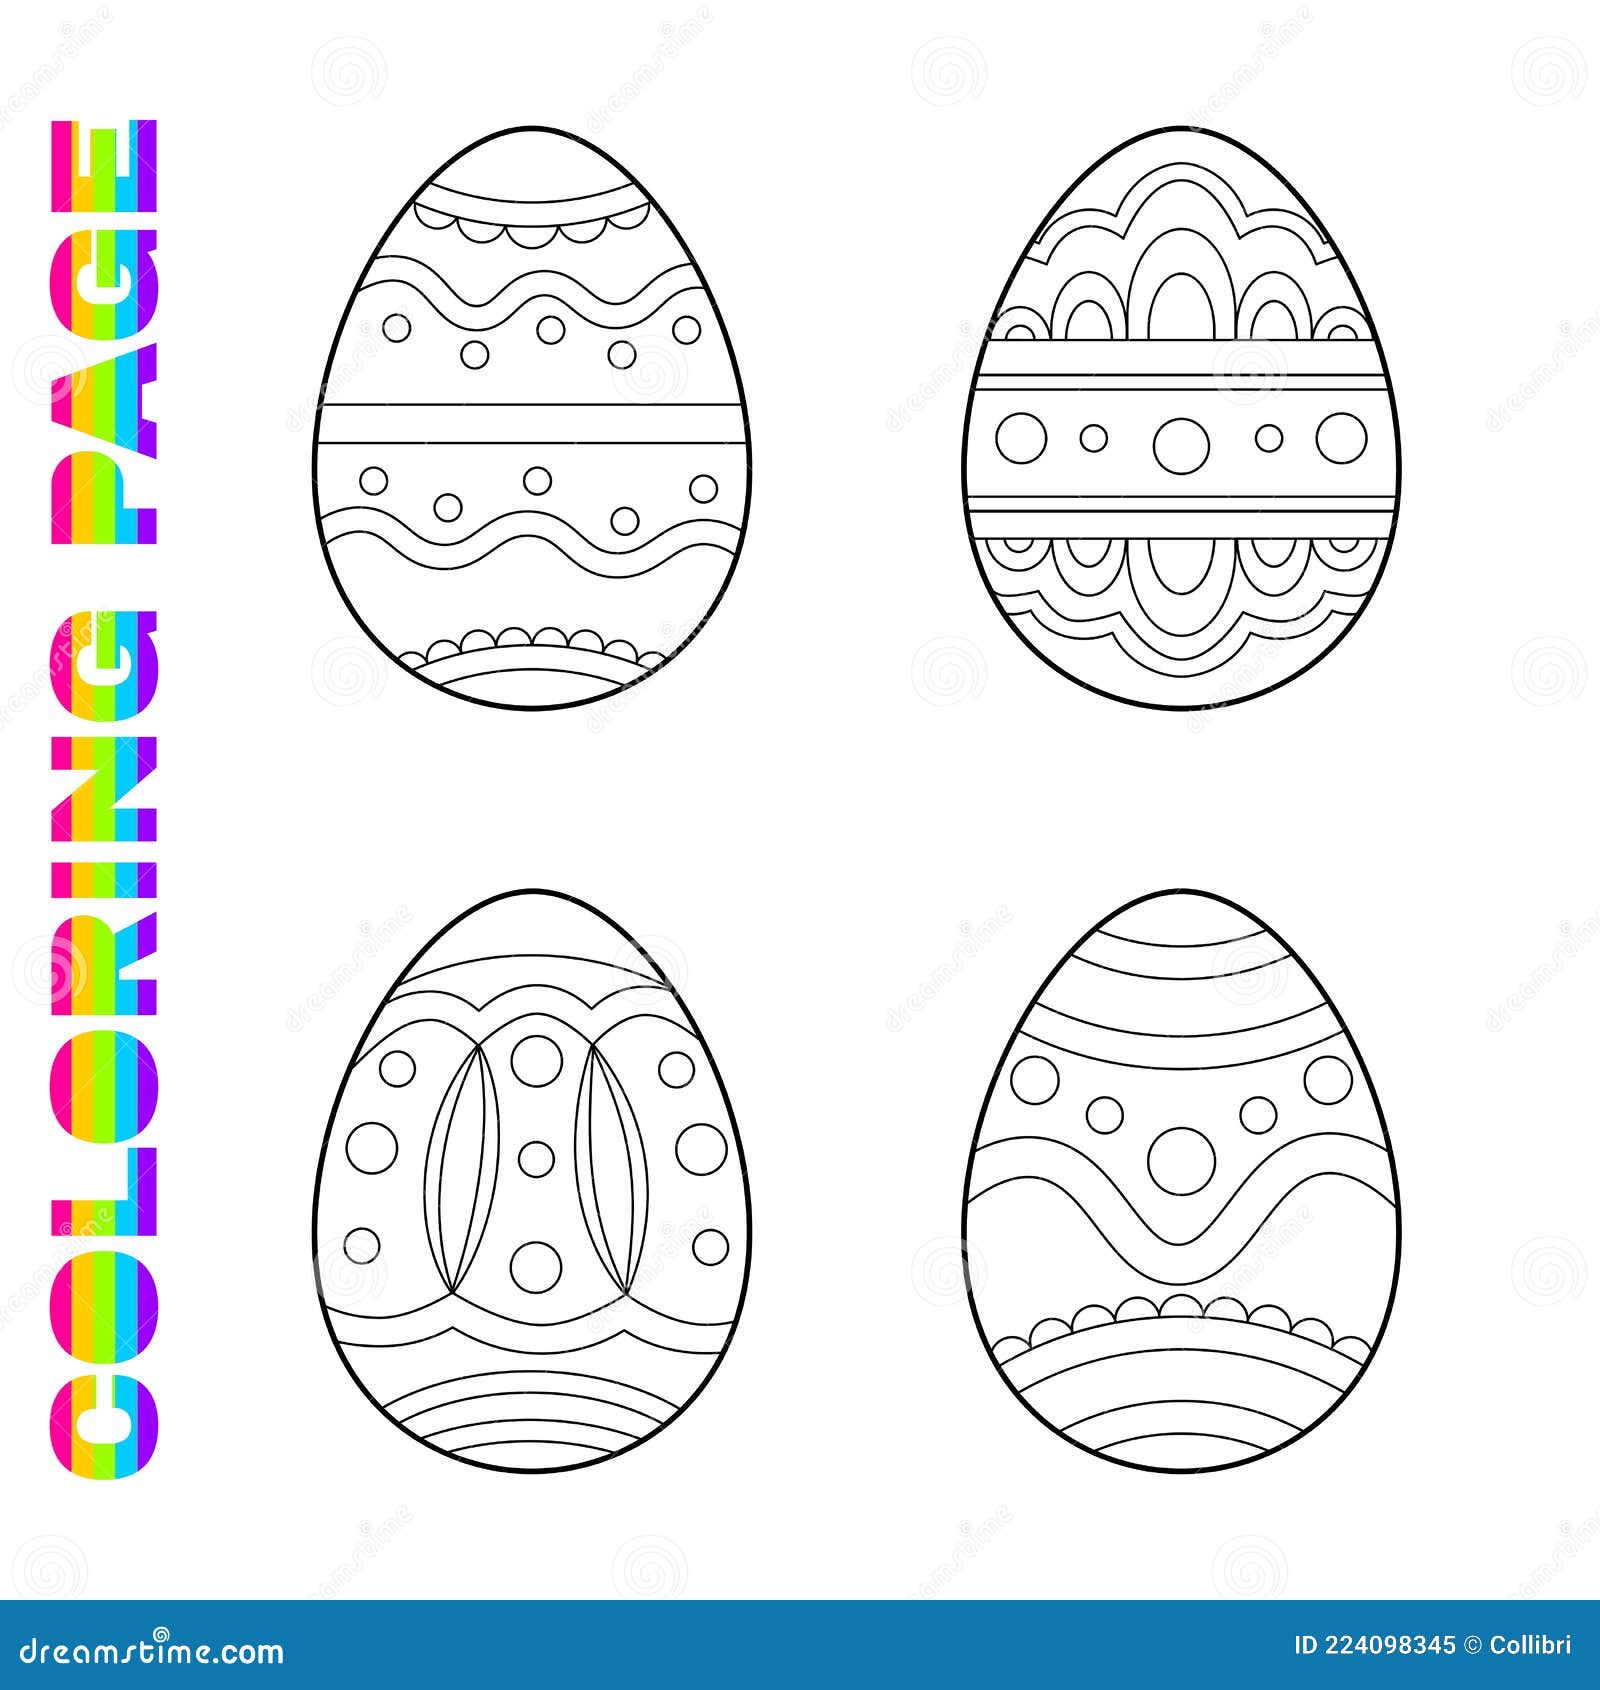 Coloring page for kids with ornate easter eggs for toddlers stock vector